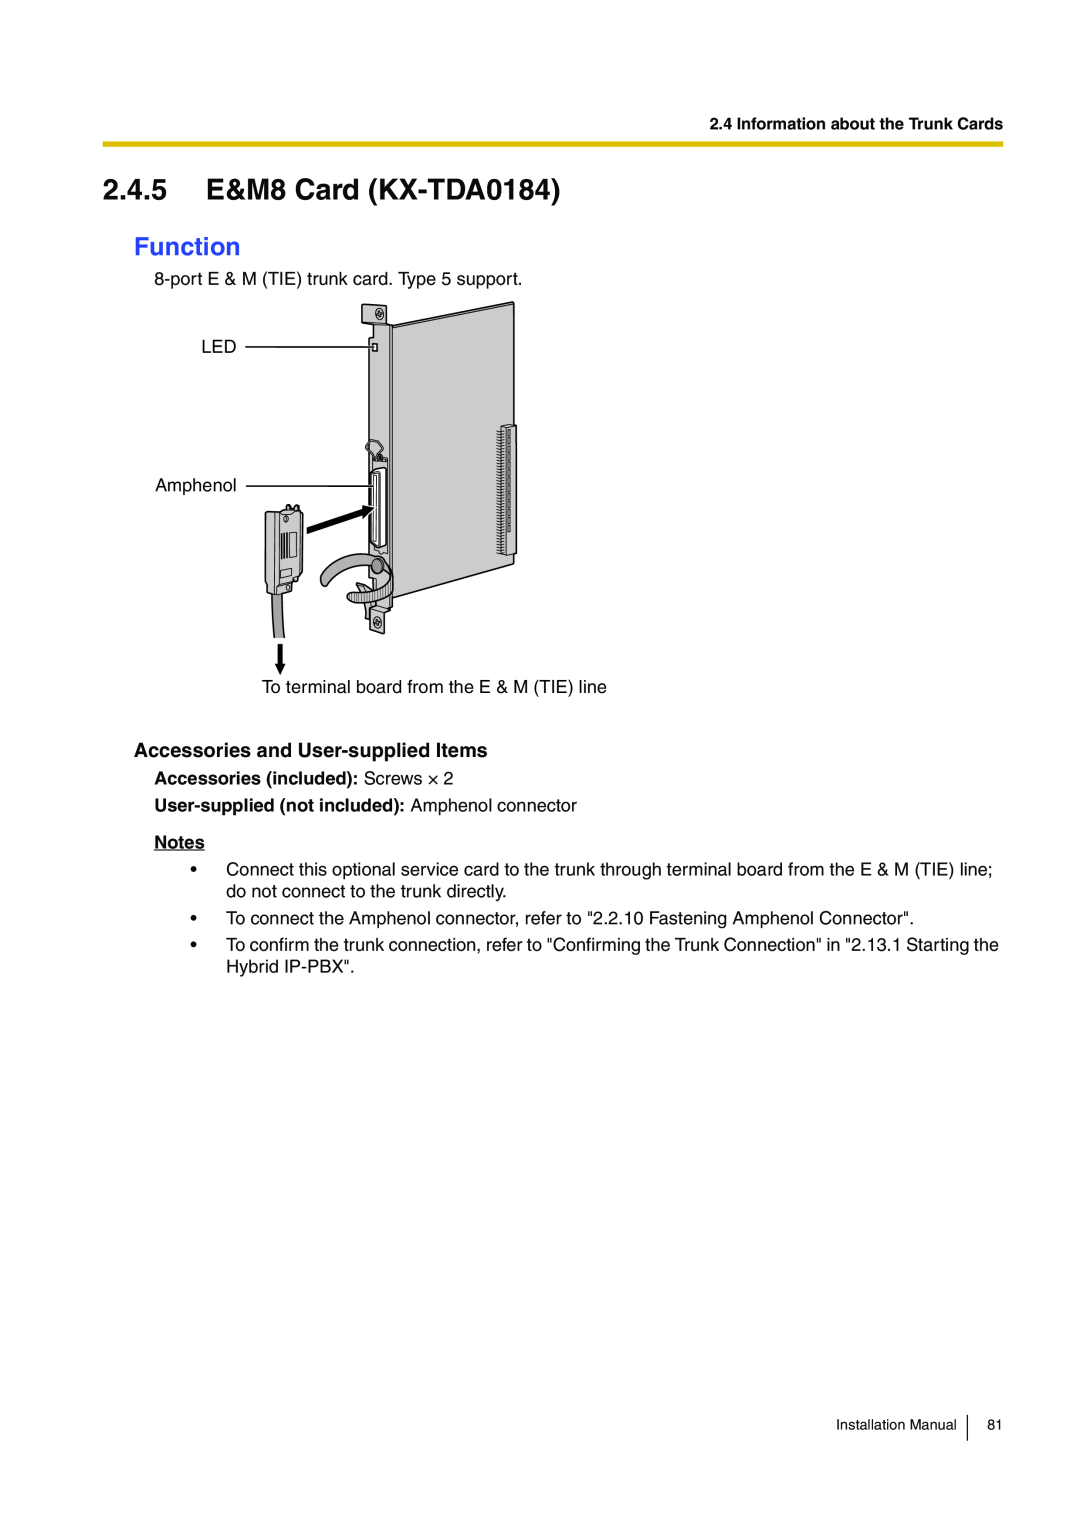 Panasonic KX-TDA100 installation manual 2.4.5 E&M8 Card KX-TDA0184, Function, Accessories and User-supplied Items 